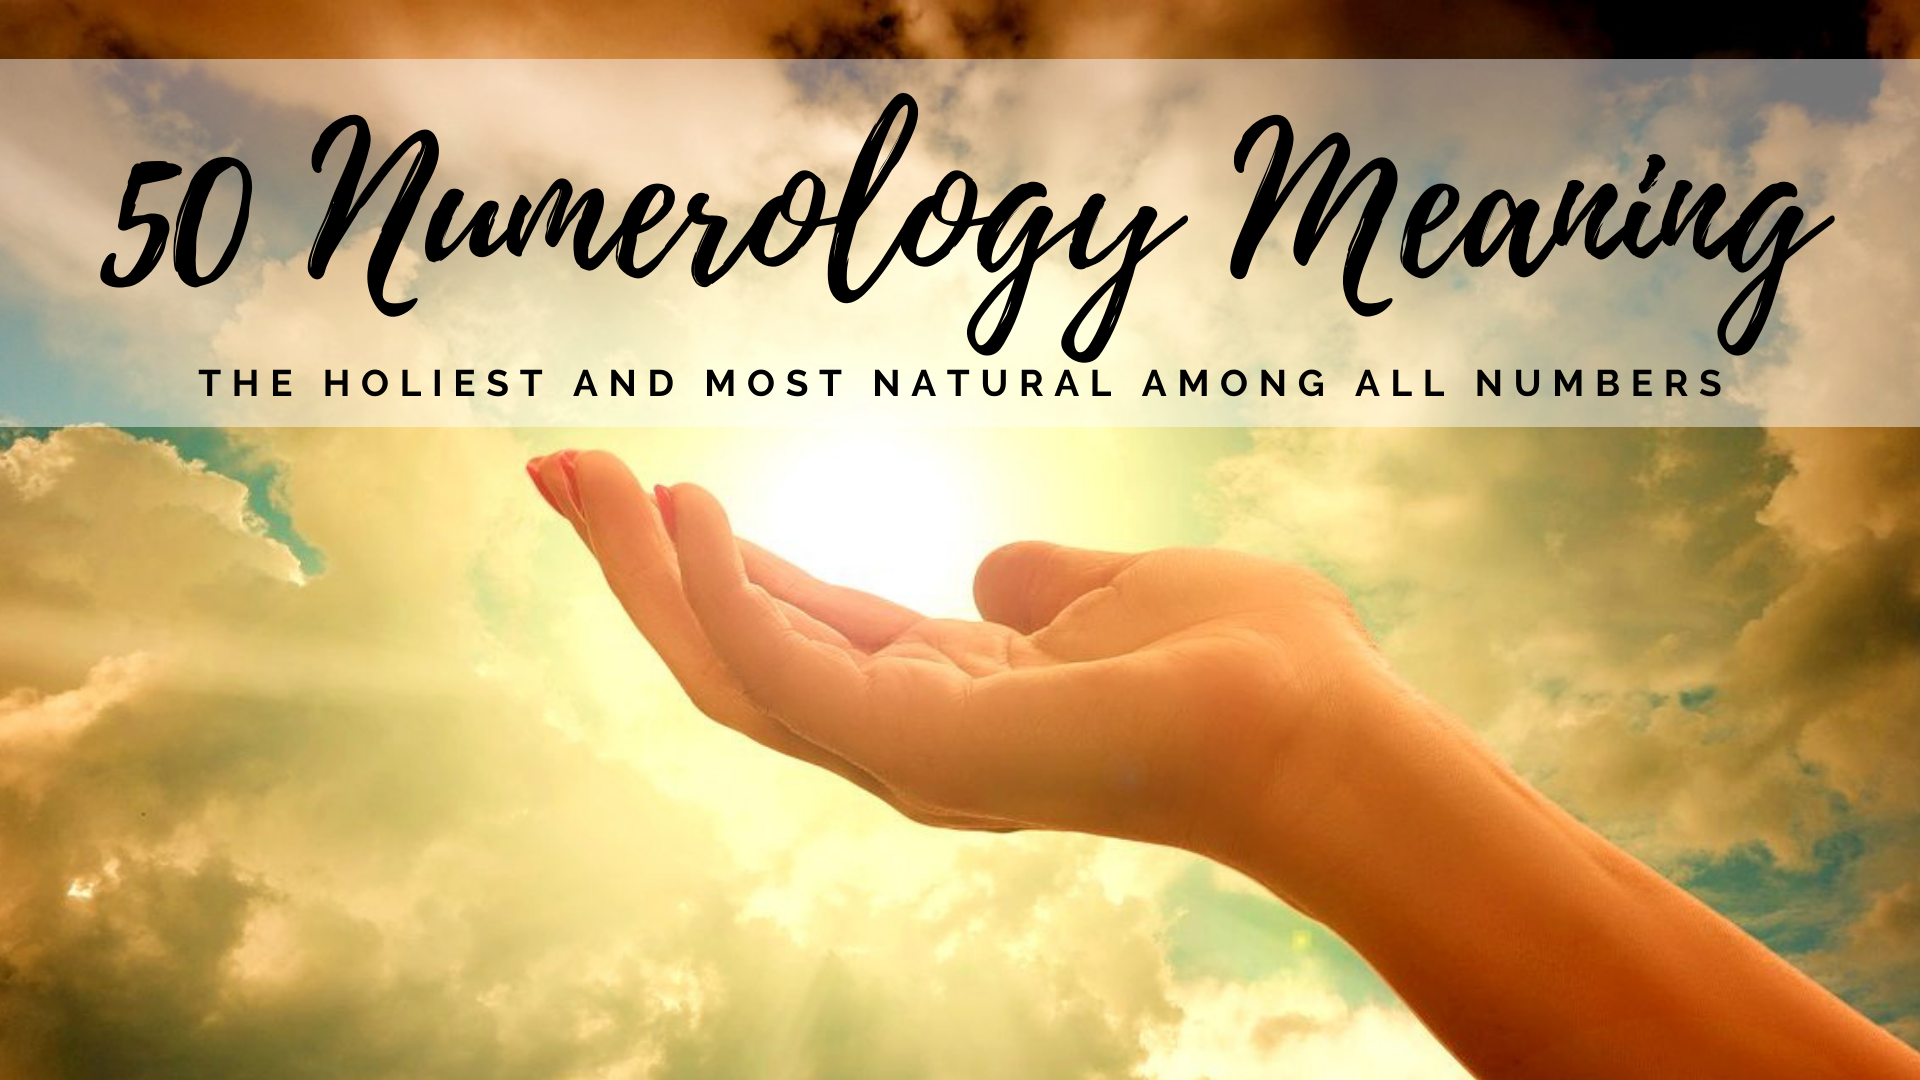 50 Numerology Meaning - The Holiest And Most Natural Among All Numbers